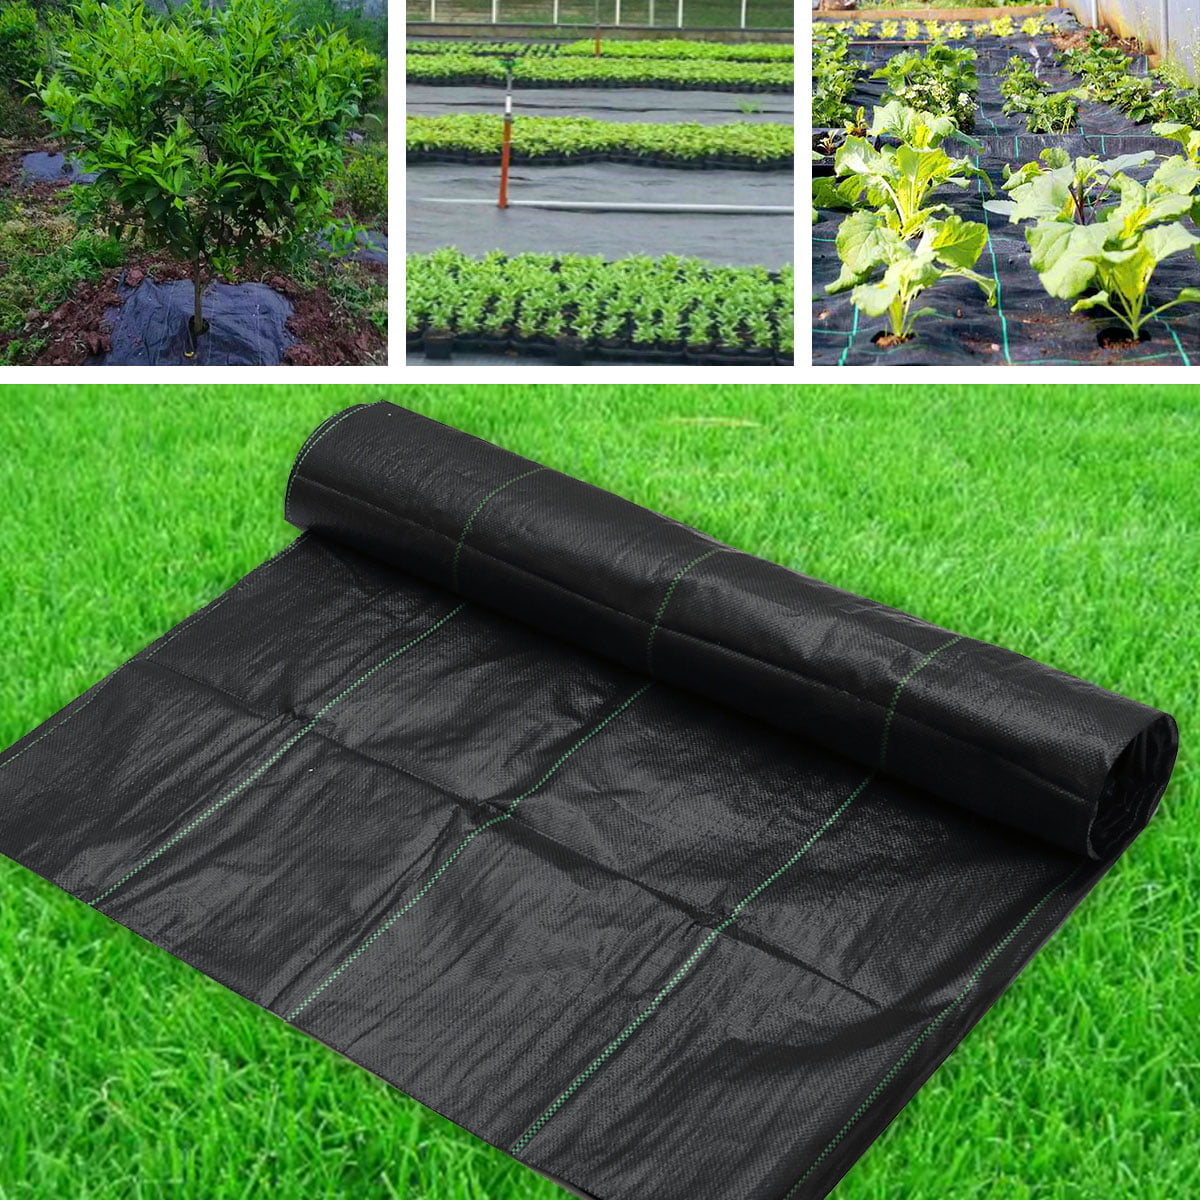 PE Ground Cover Weed Control Membrane for Flower Beds Garden Tailor 3ft x50ft Landscape Fabric Heavy Duty Eco-Friendly and Durable Woven Garden Weed Barrier Fabric 3'x50'